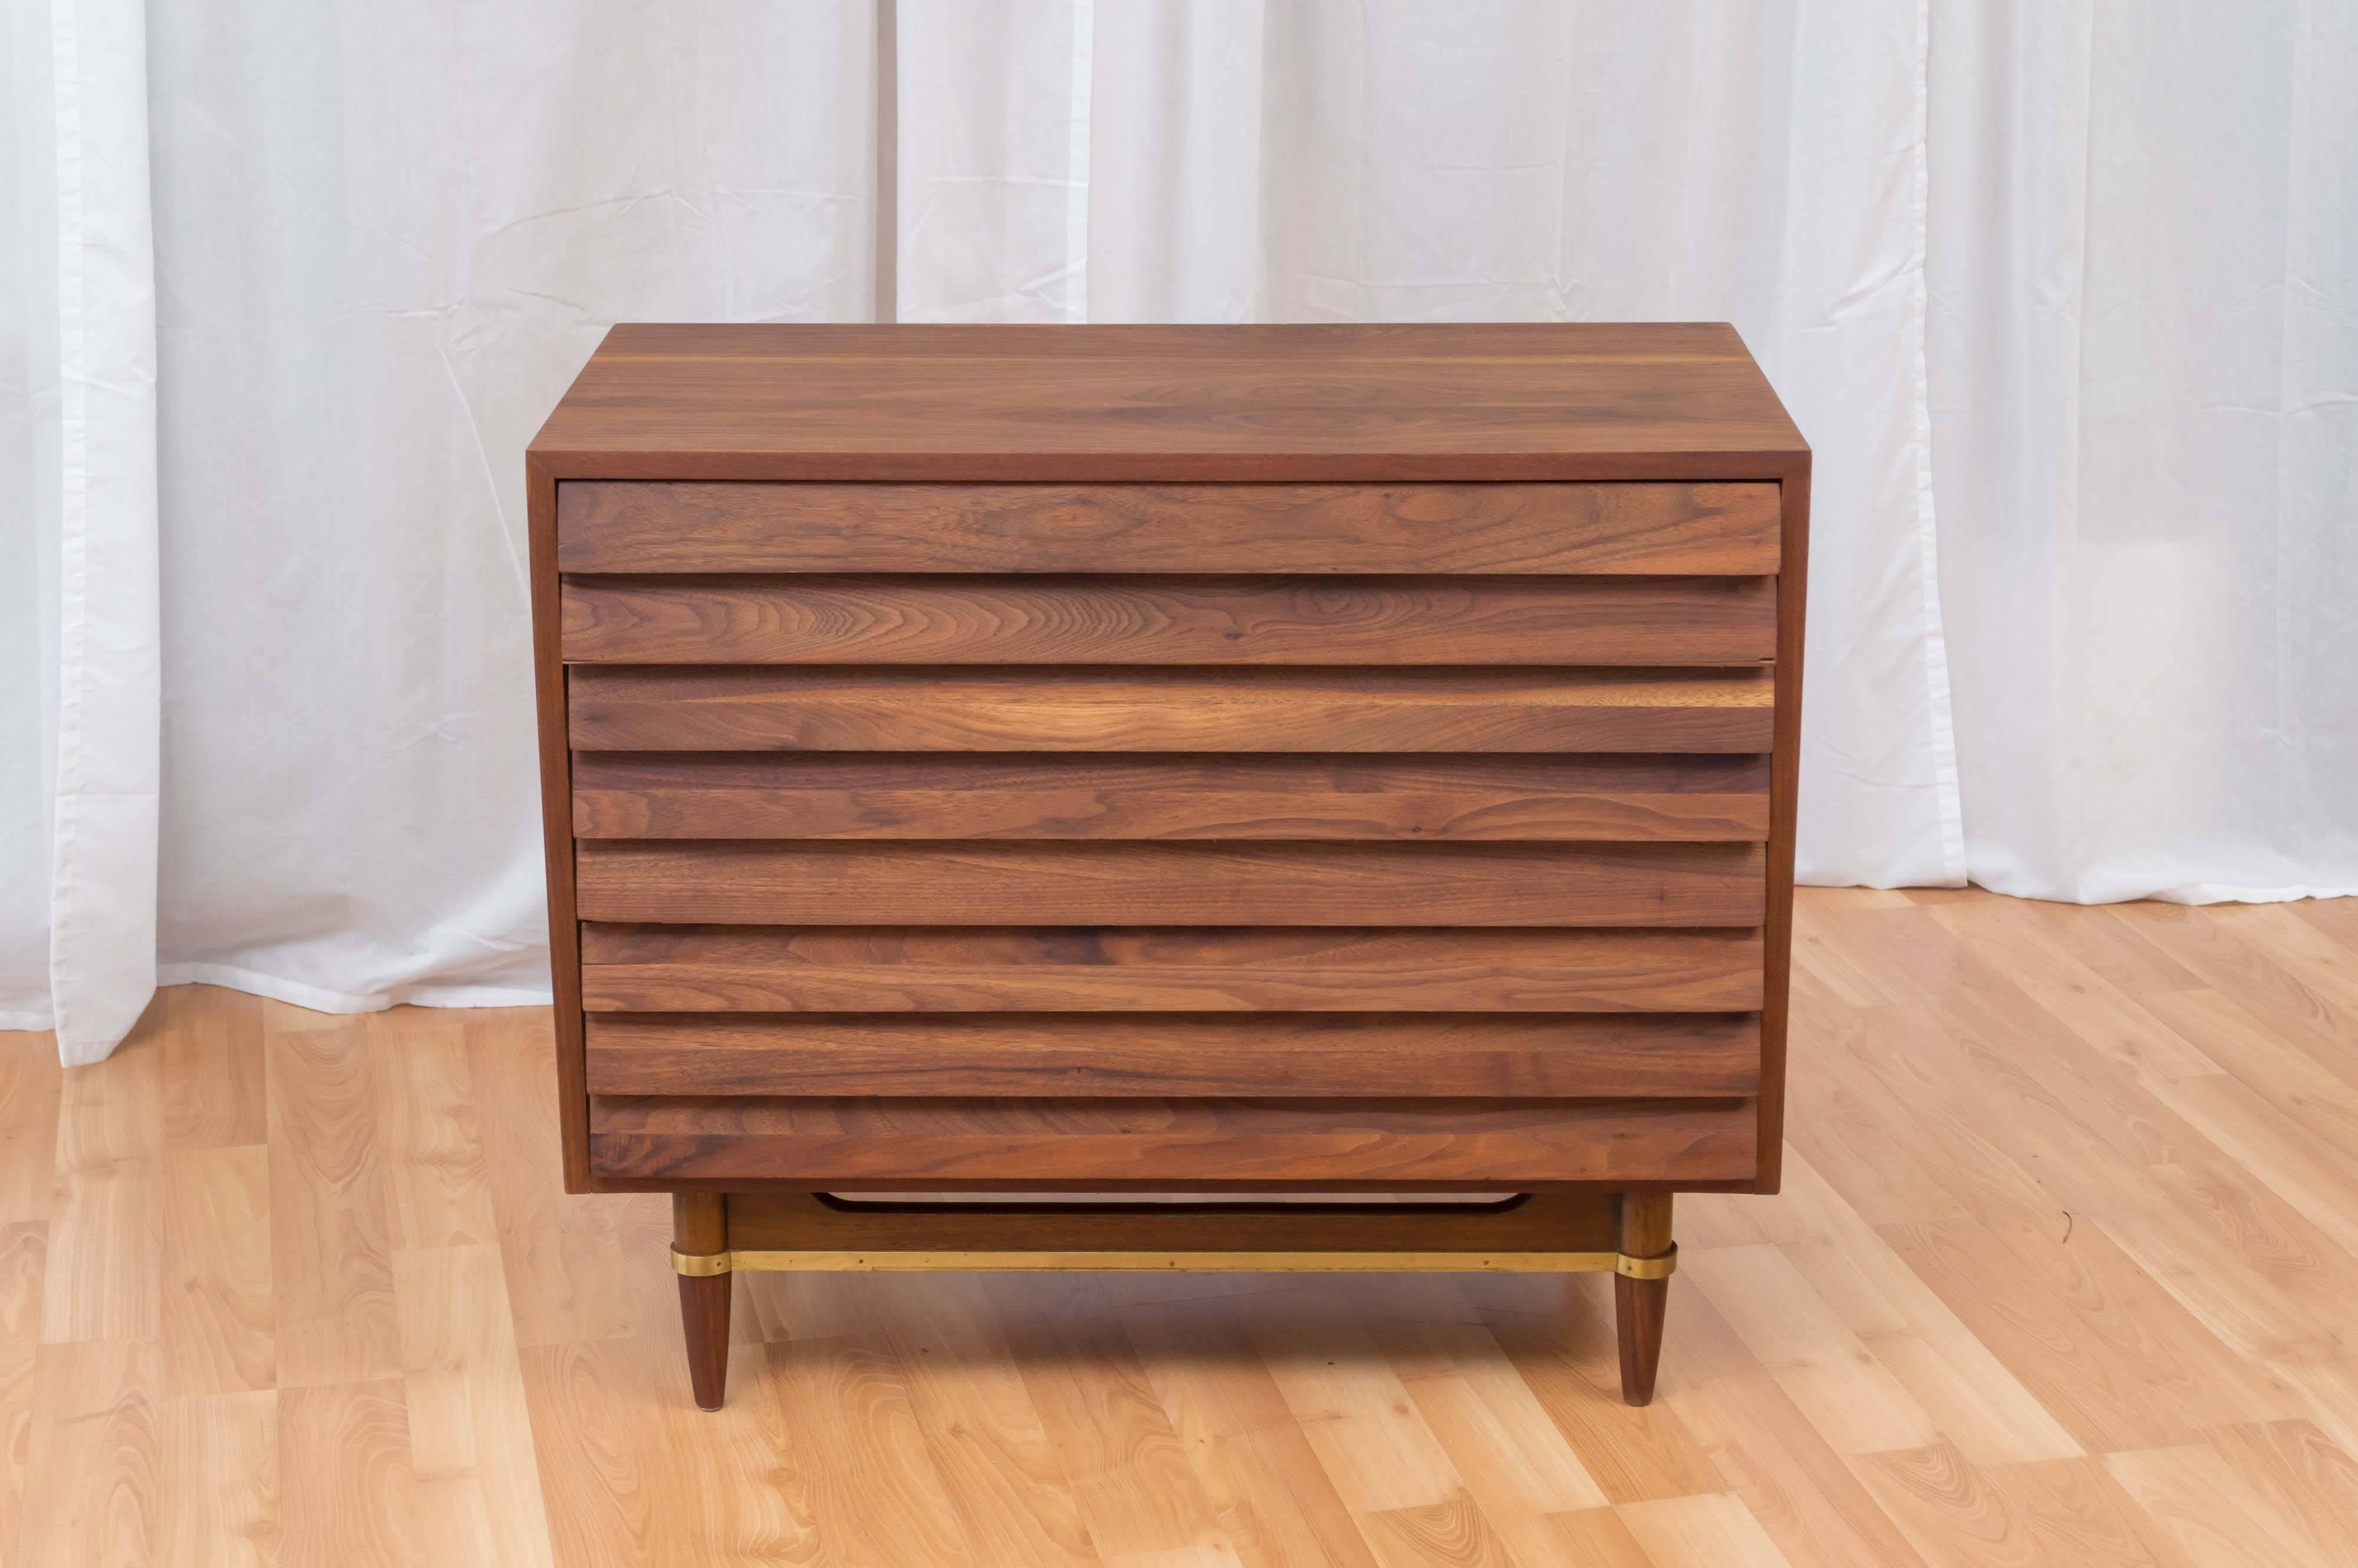 A three-drawer walnut dresser from designer Merton Gershun’s “Dania Collection” for American of Martinsville.

Clean lines and Classic louver-style design constructed out of beautifully figured chocolate brown walnut. On torpedo feet, with a brass